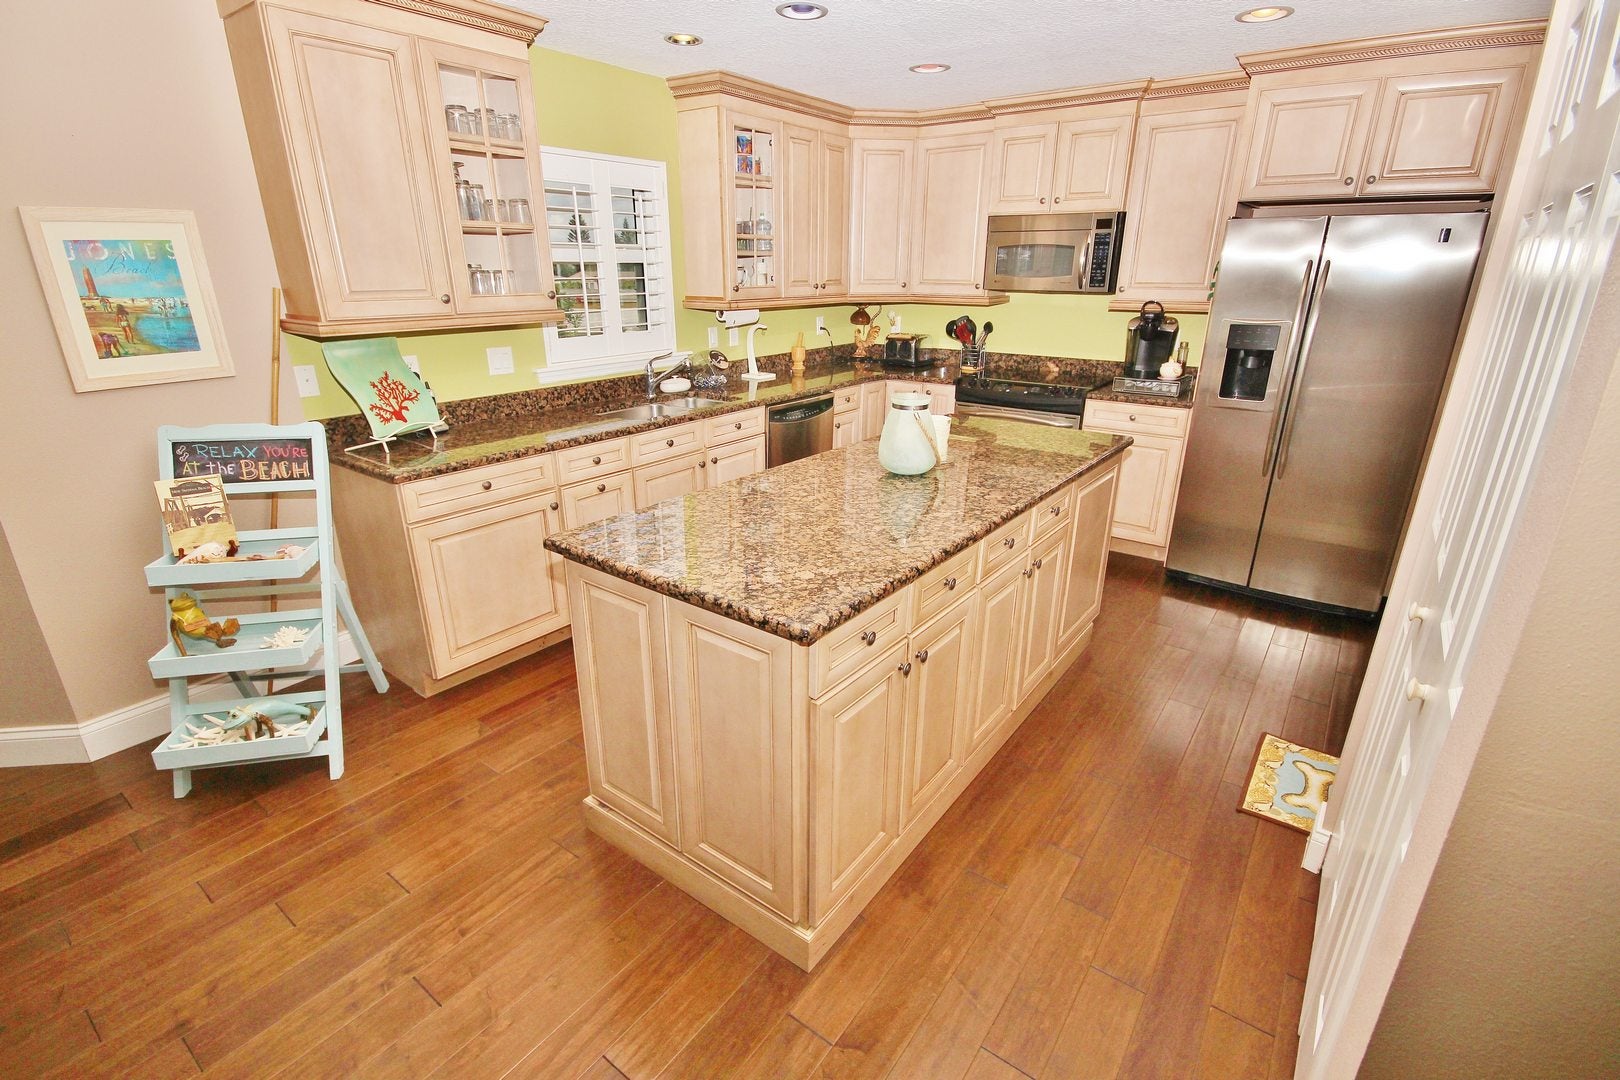 The Large Kitchen with Stainless Steel Appliances